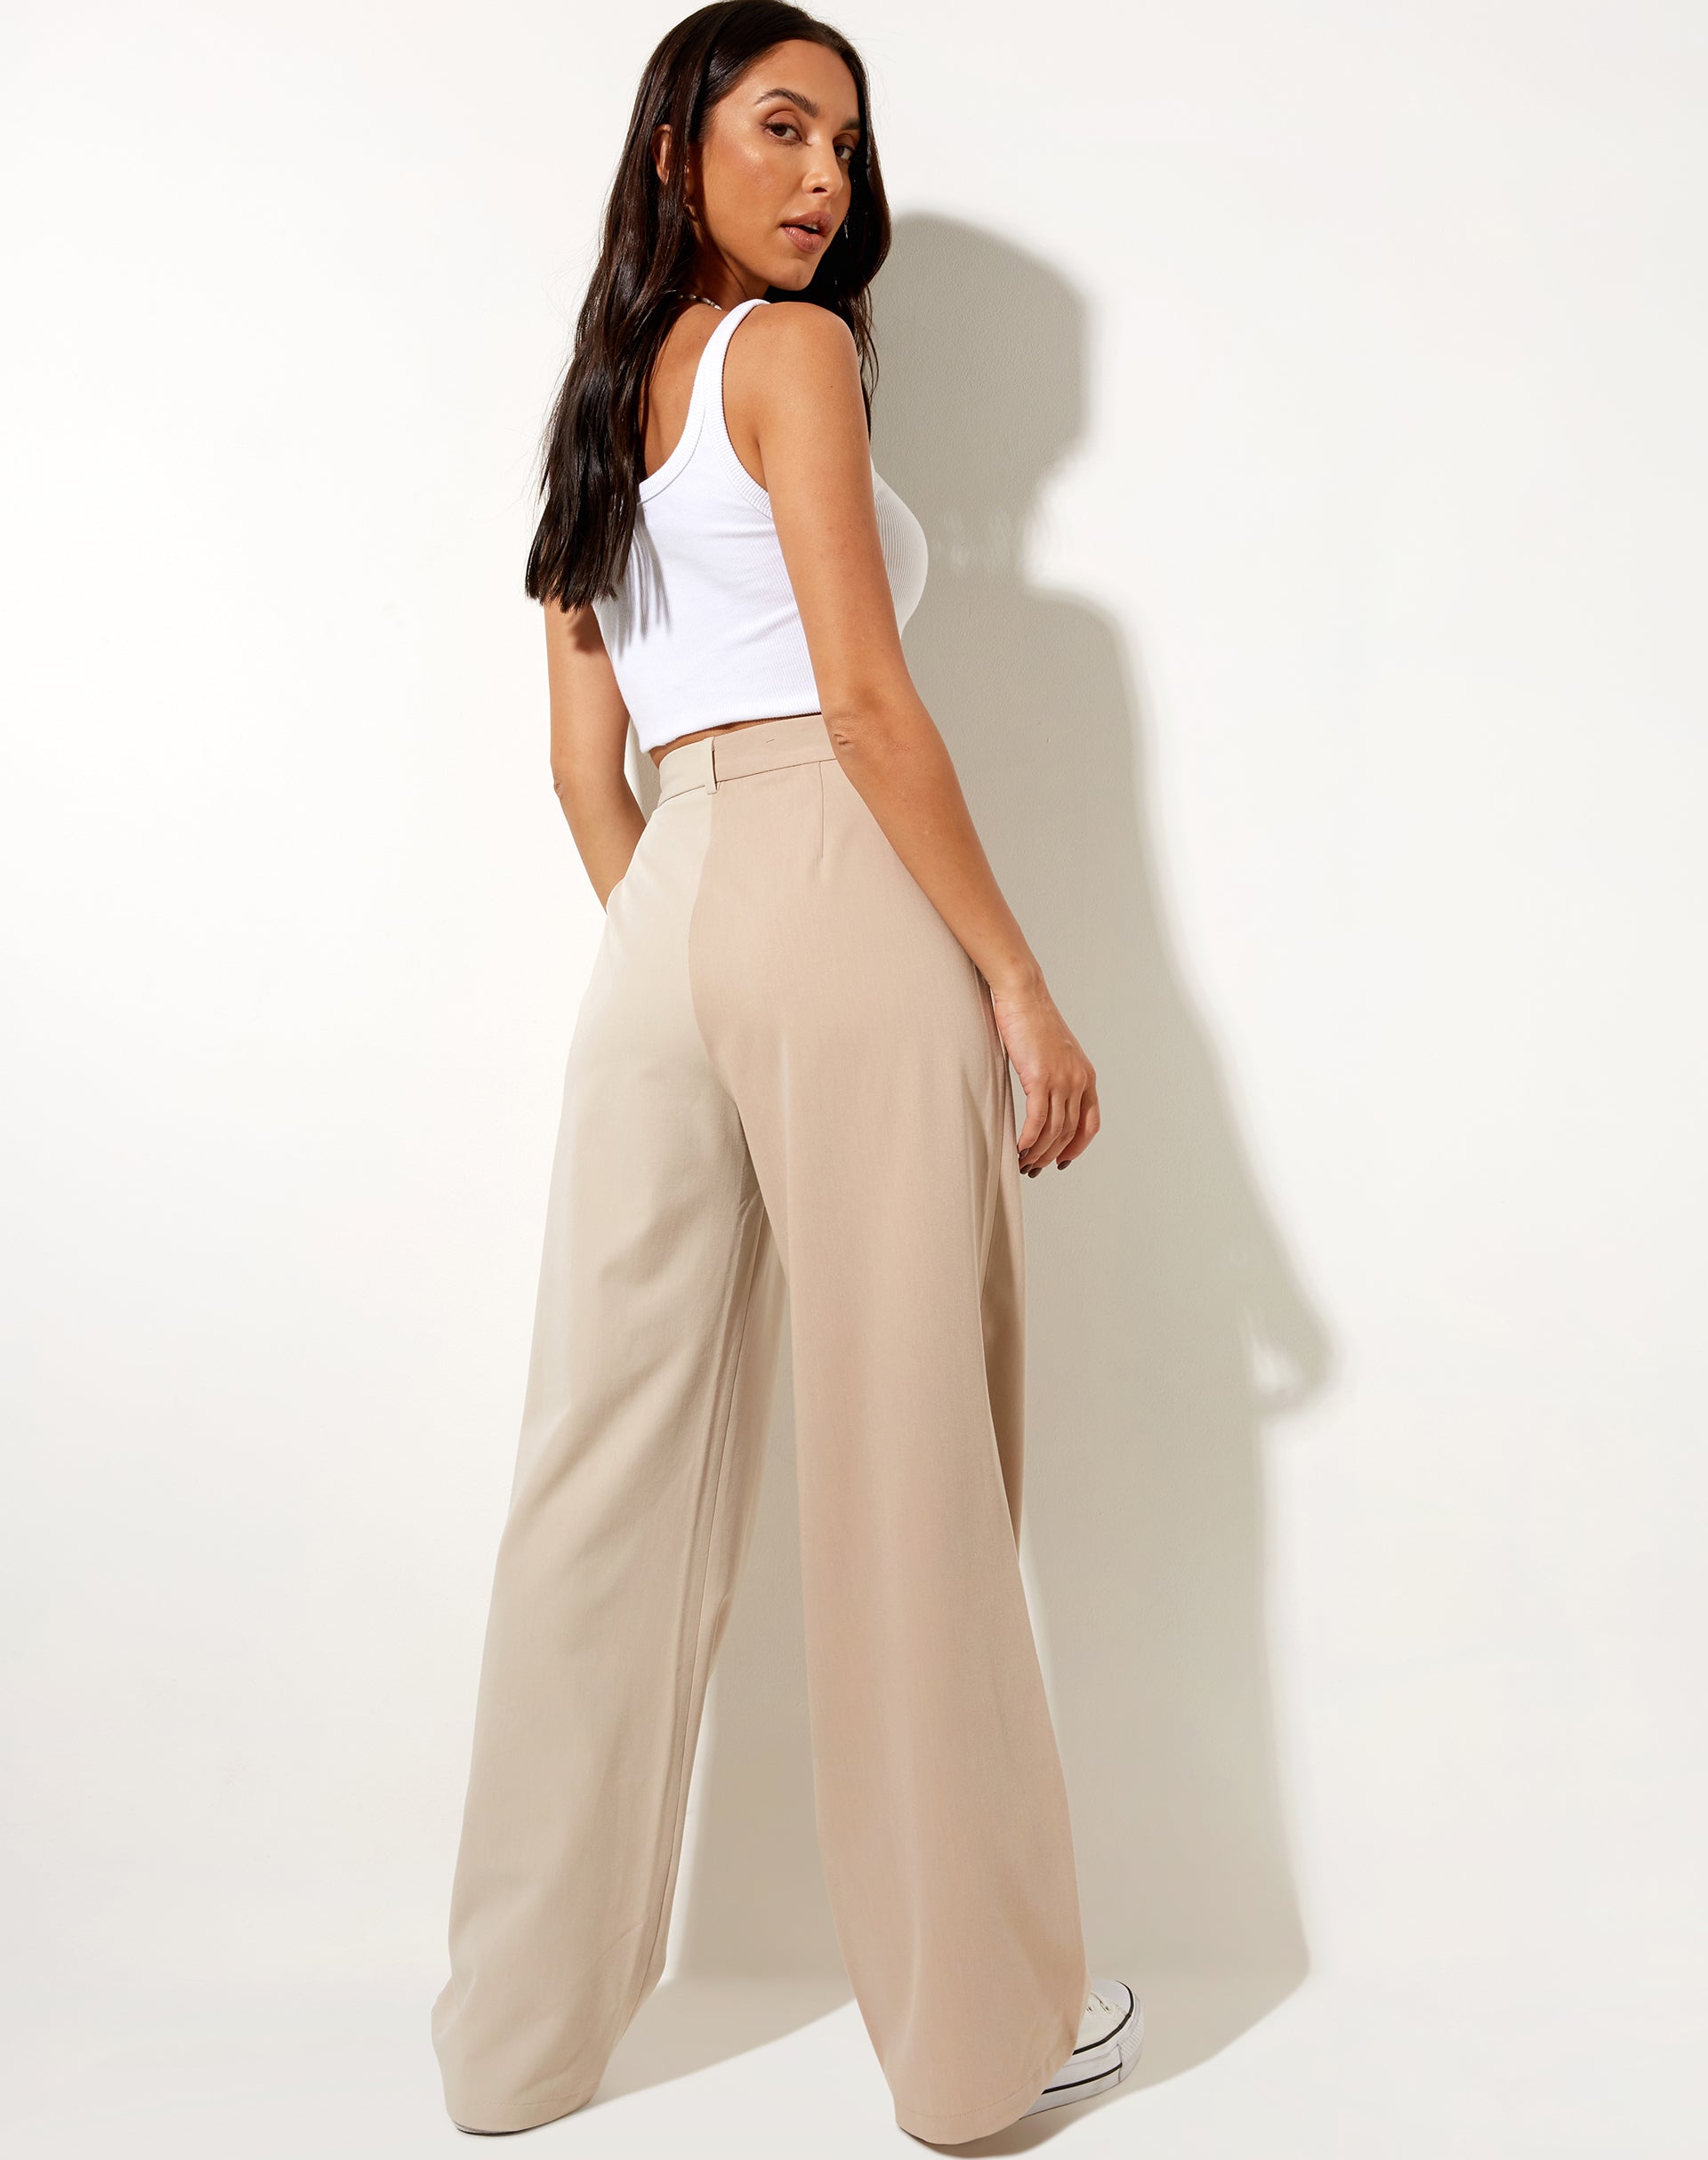 Image of Abba Trouser in Contrast Tan and Beige